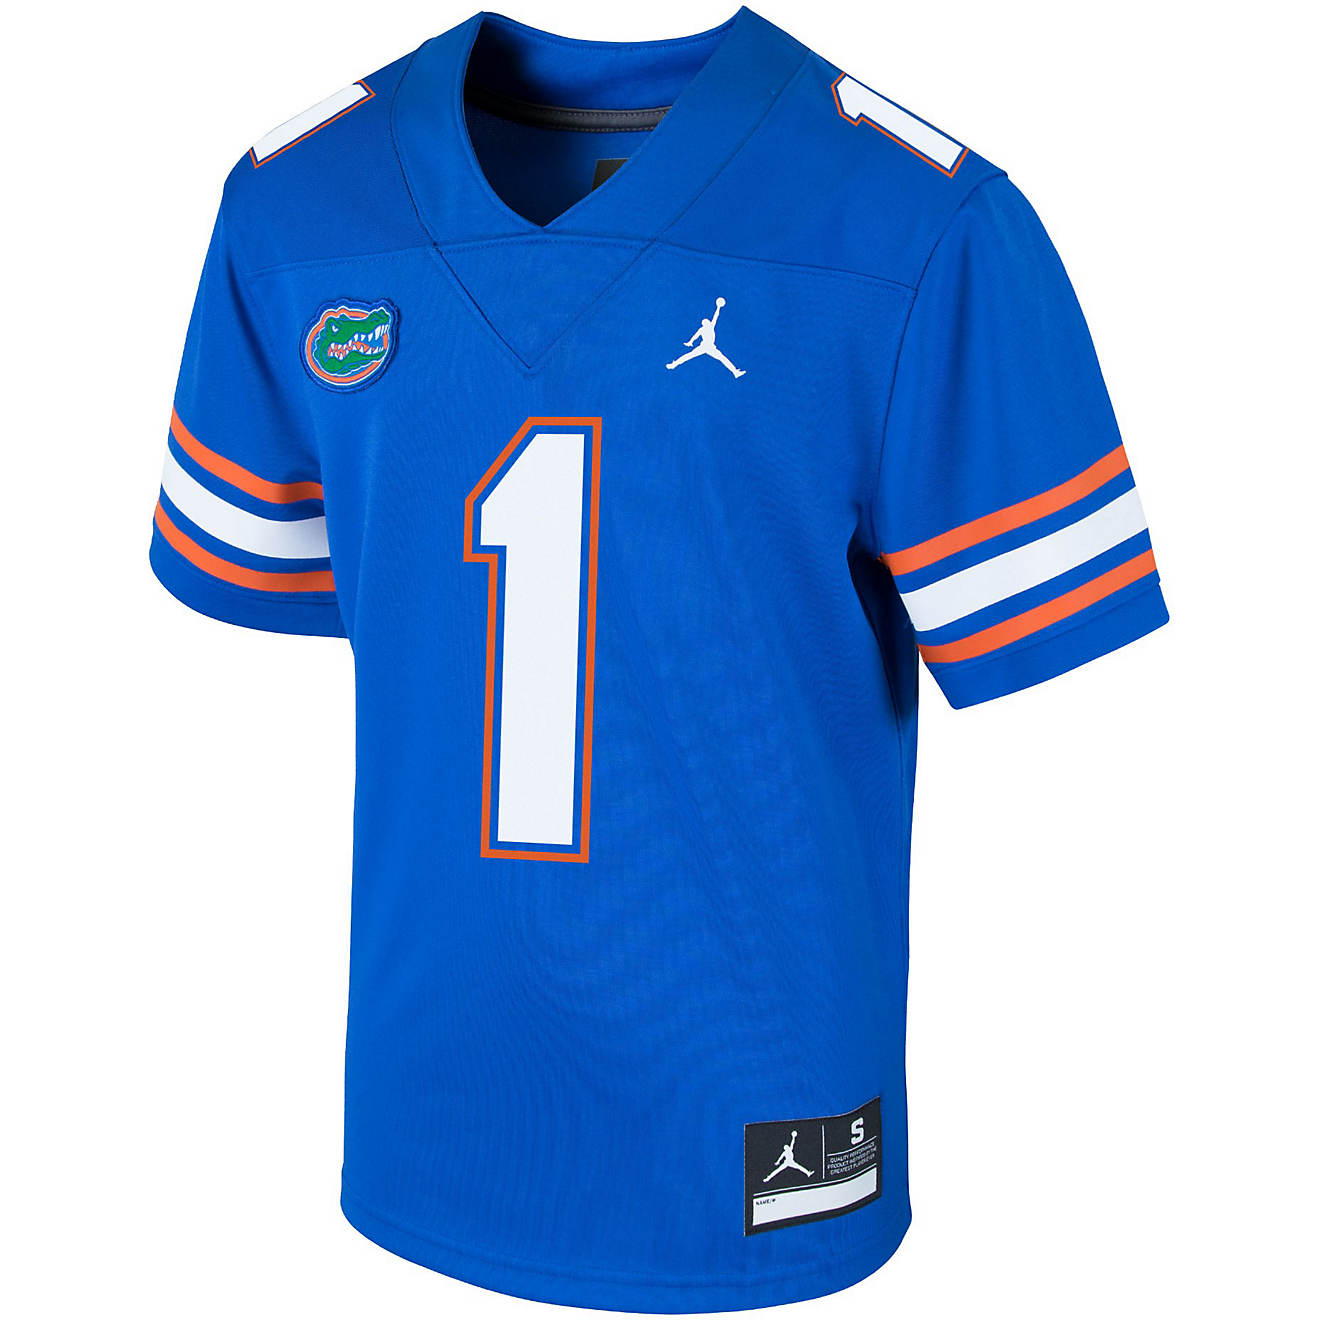 Nike Boys' 4-7 University of Florida Untouchable Replica Football Jersey                                                         - view number 1